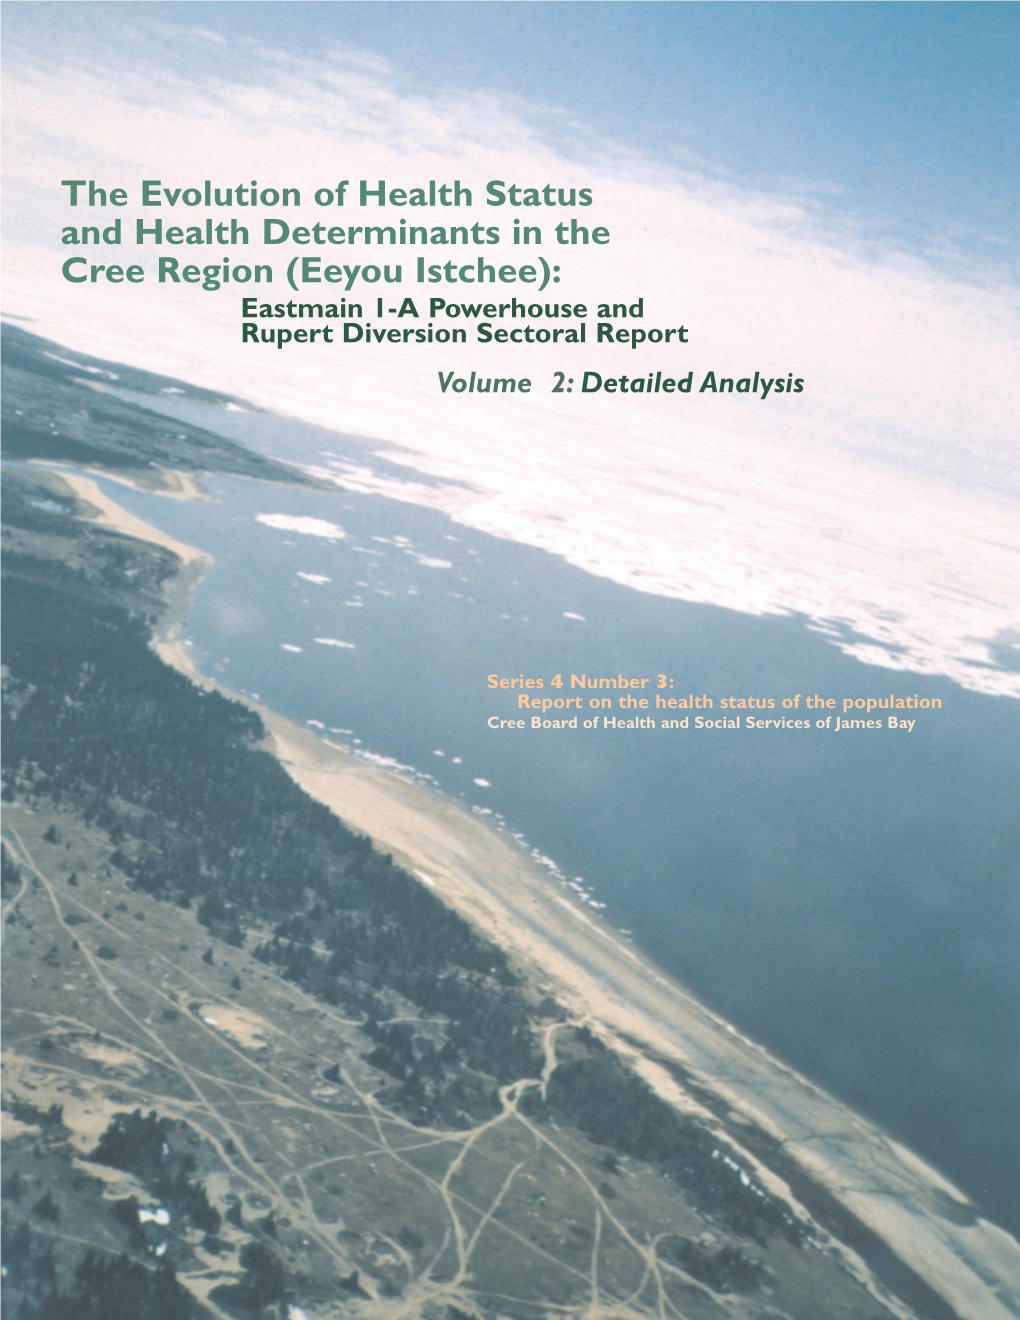 Eeyou Istchee): Eastmain 1-A Powerhouse and Rupert Diversion Sectoral Report Volume 2: Detailed Analysis